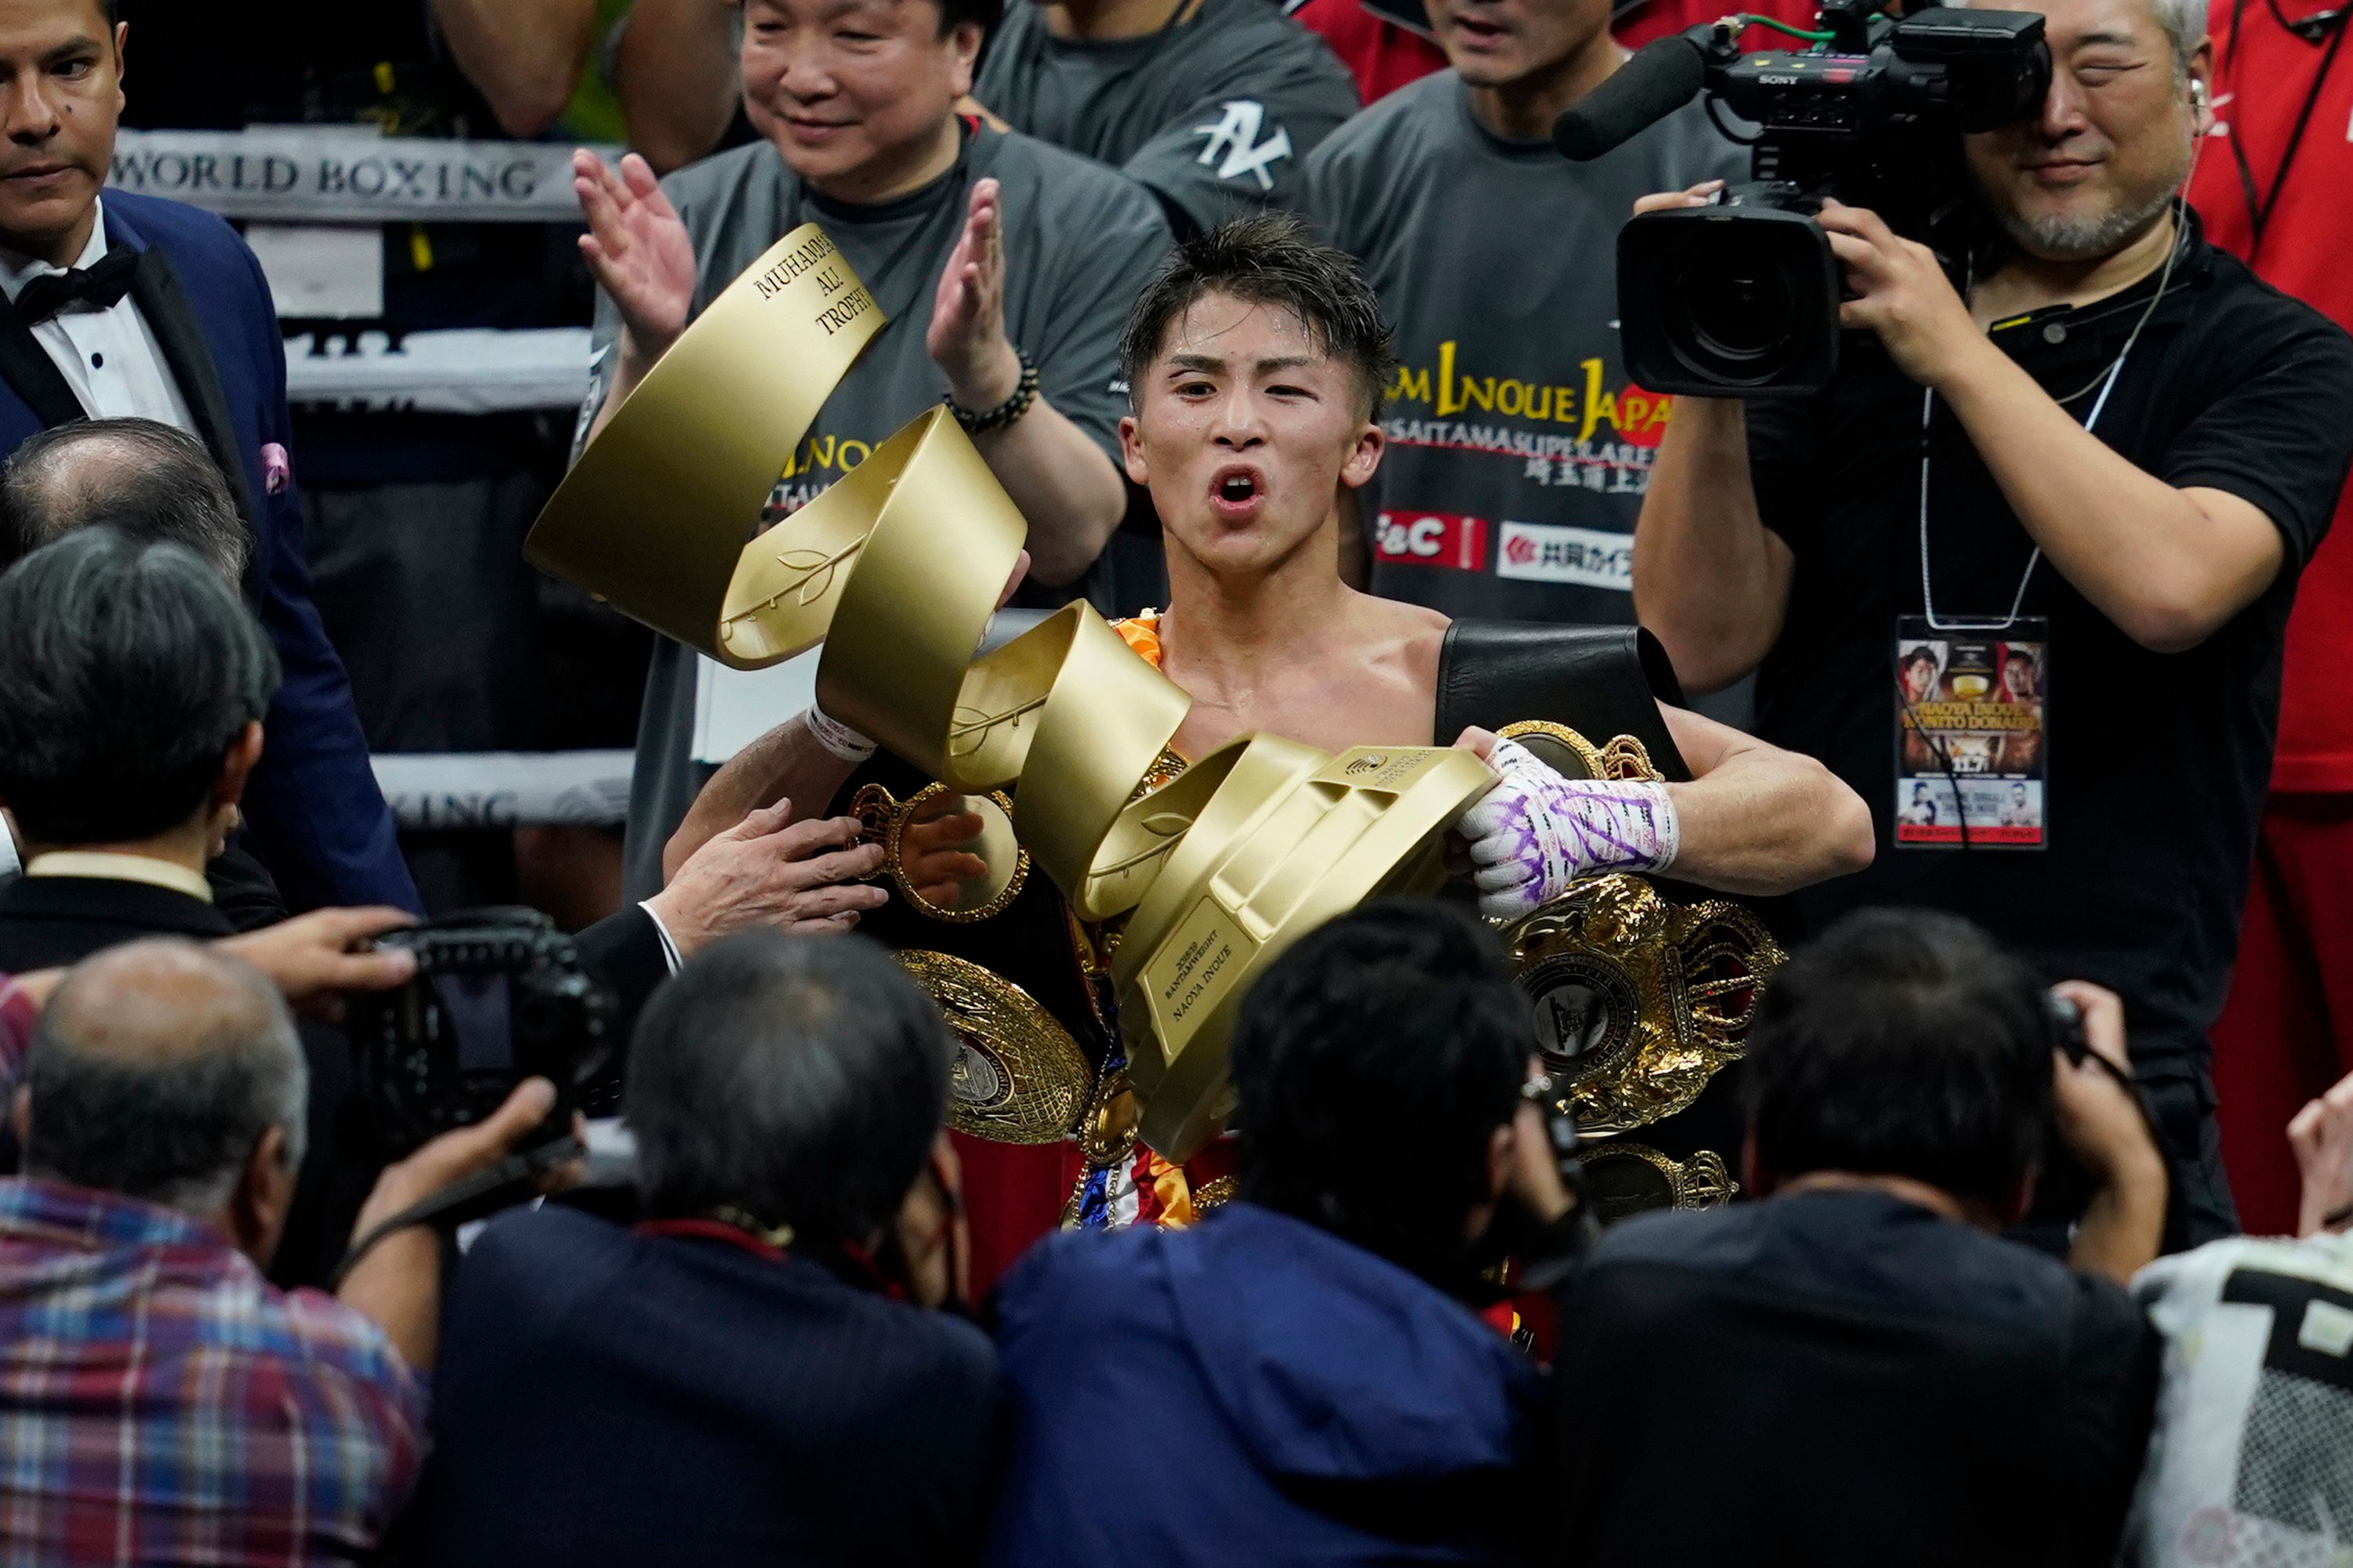 Naoya Inoue is regarded as one of boxing's best pound-for-pound fighters